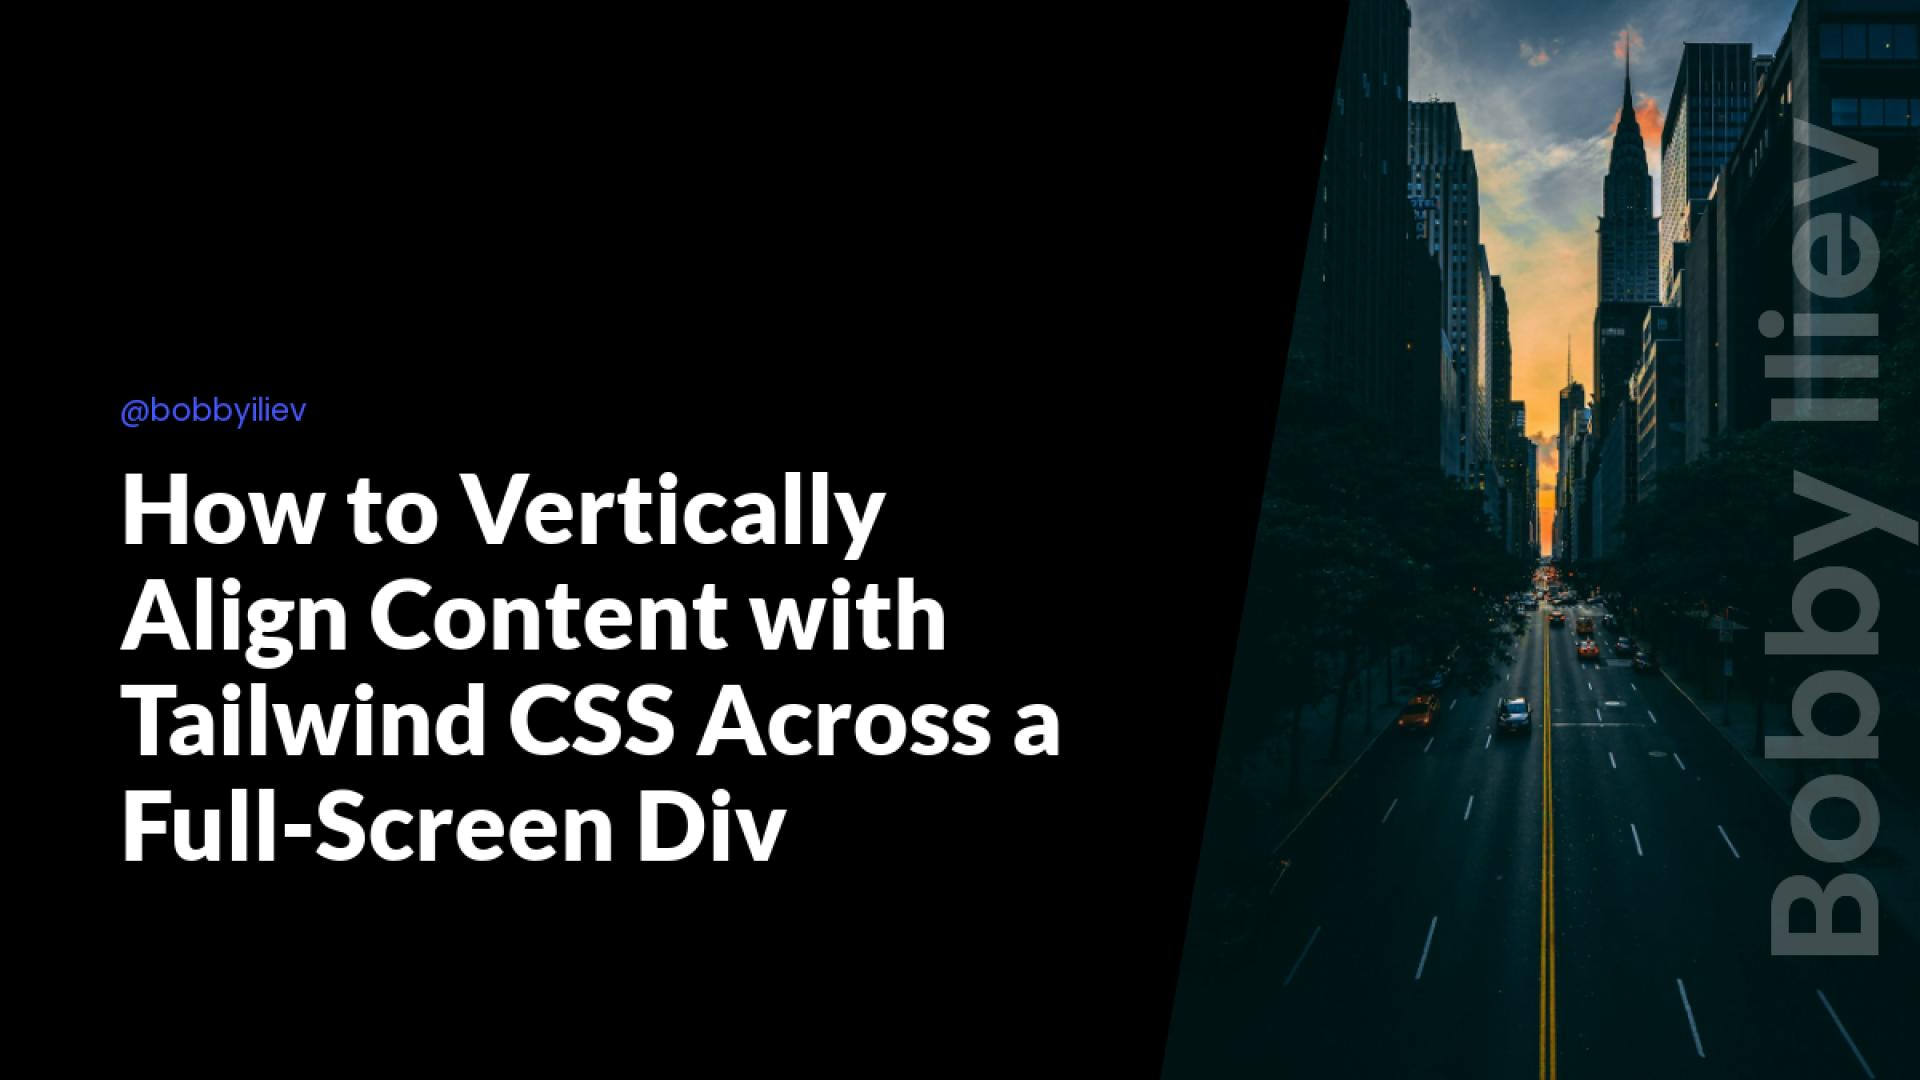 How to Vertically Align Content with Tailwind CSS Across a Full-Screen Div